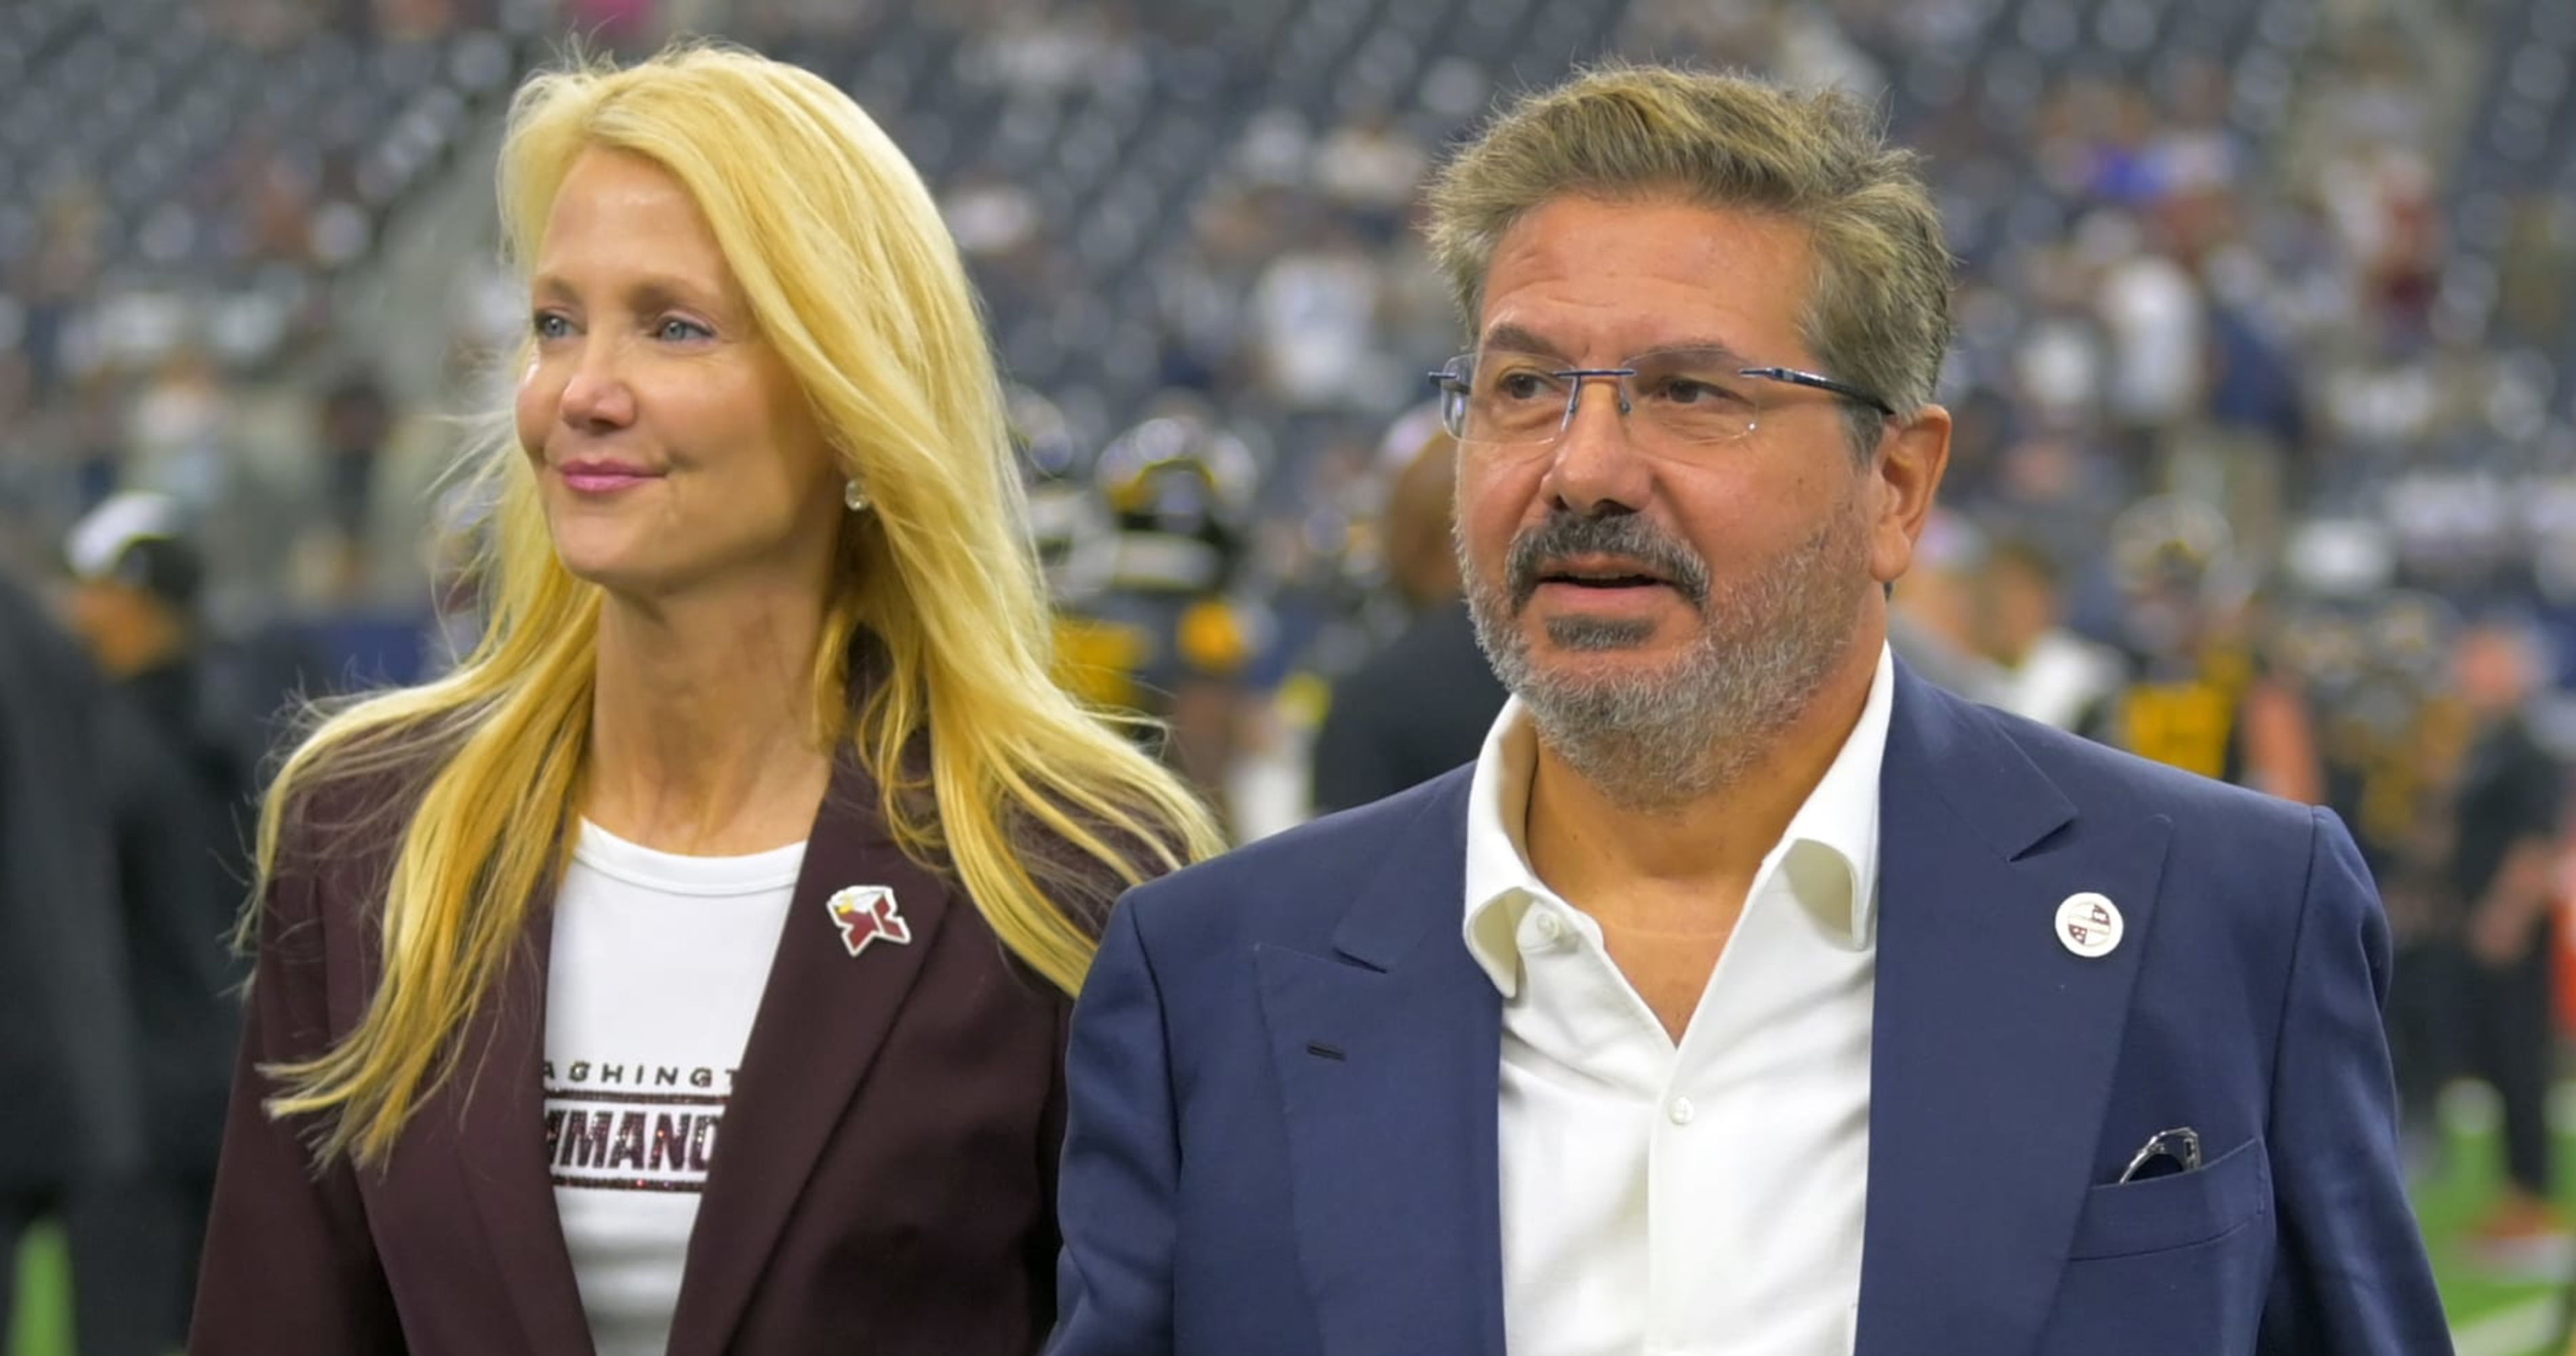 ESPN: Commanders' Daniel Snyder Says NFL 'Is a Mafia' and 'They Can't F--k with ..